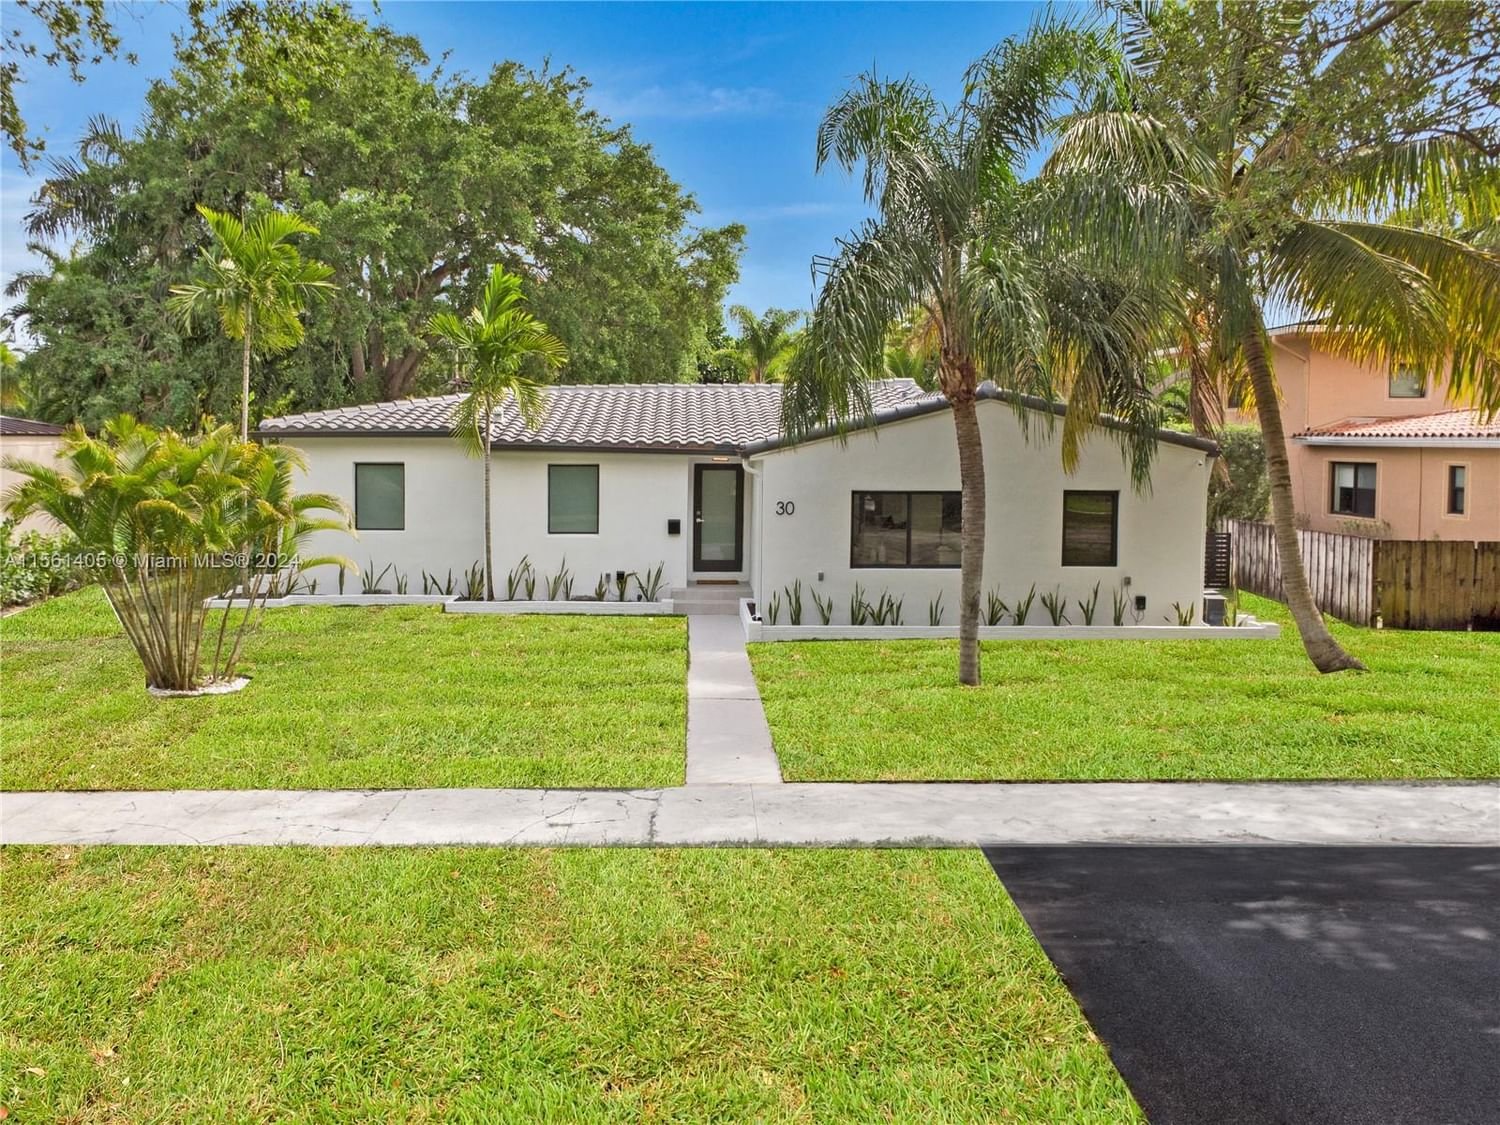 Real estate property located at 30 107th St, Miami-Dade County, DUNNINGS MIAMI SHORES EXT, Miami Shores, FL